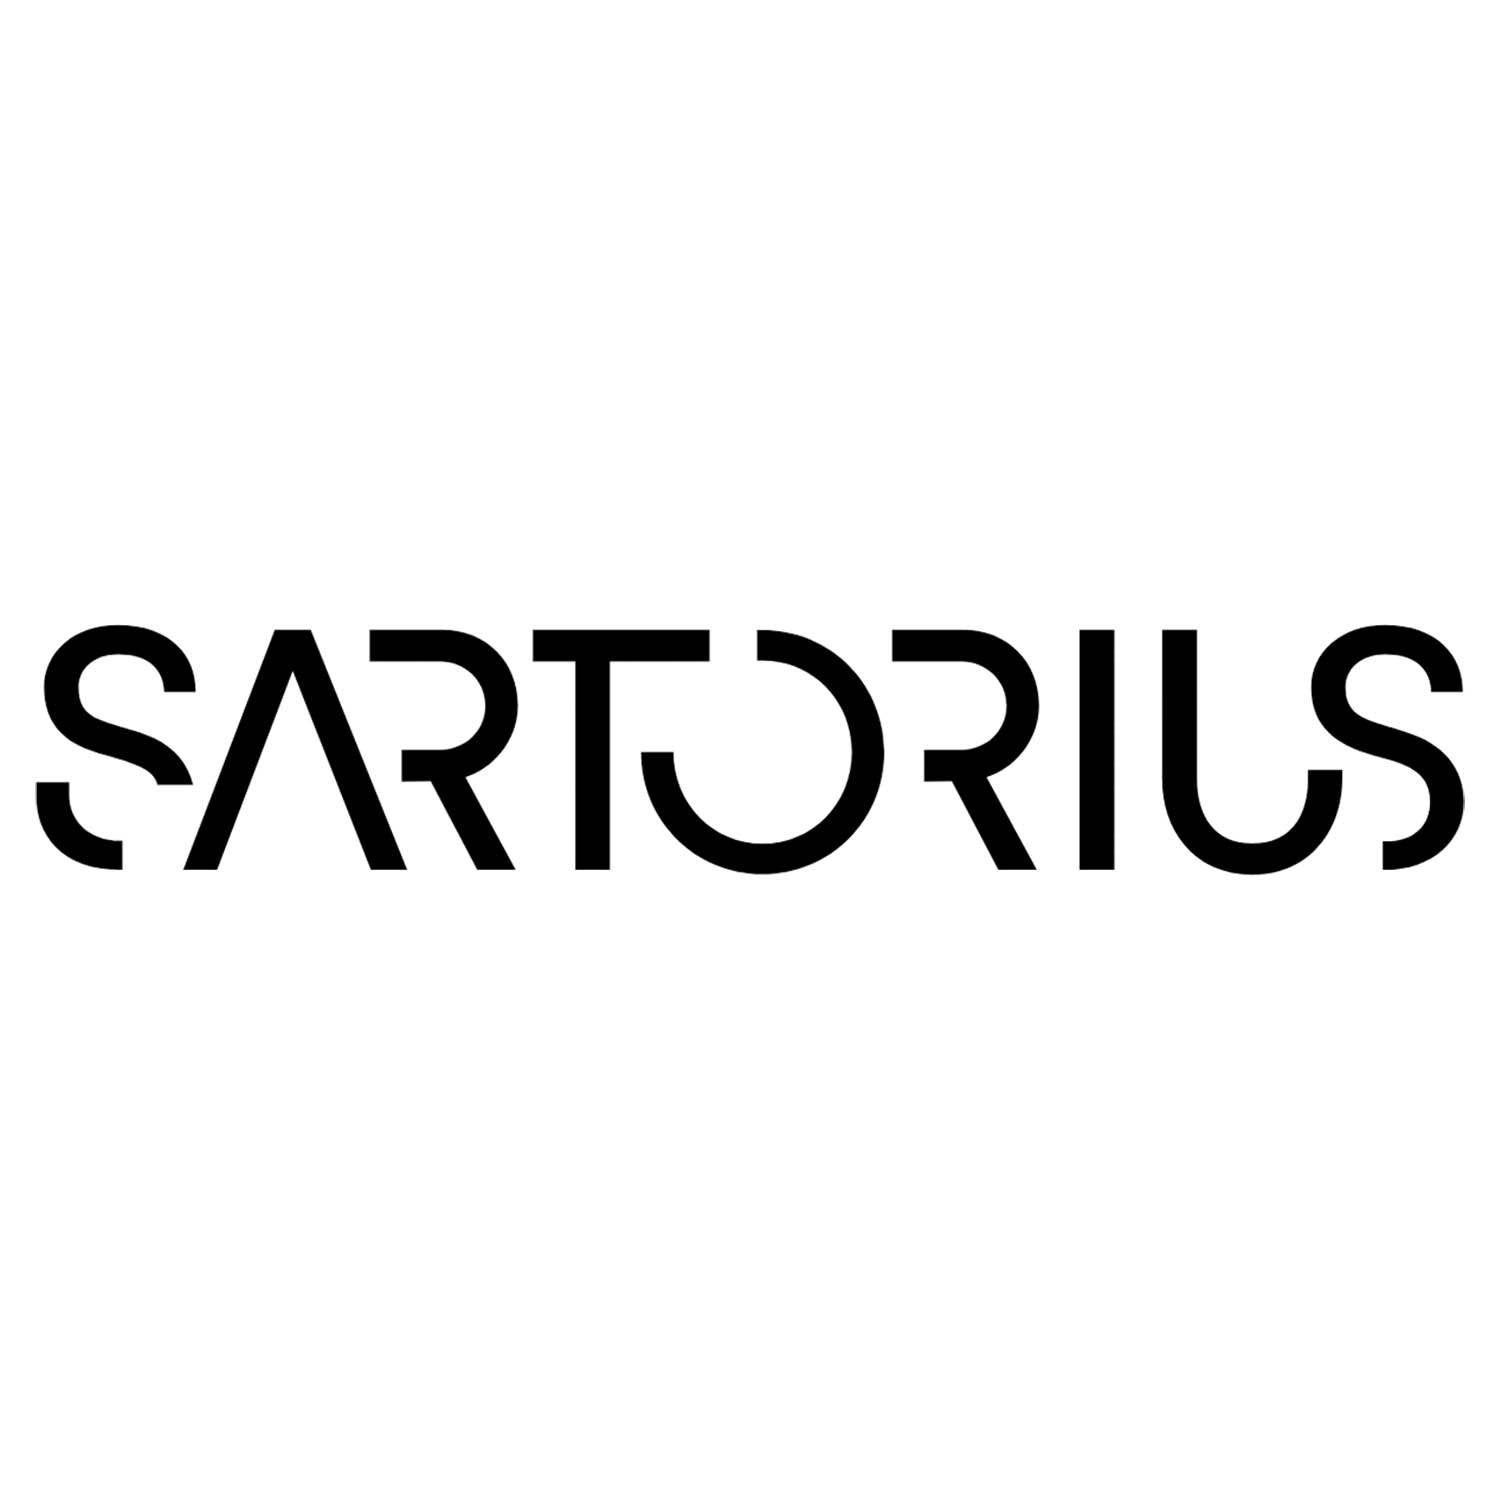 Sartorius FT-4-308-125, Technical Papers, Smooth/ Grade 3 w